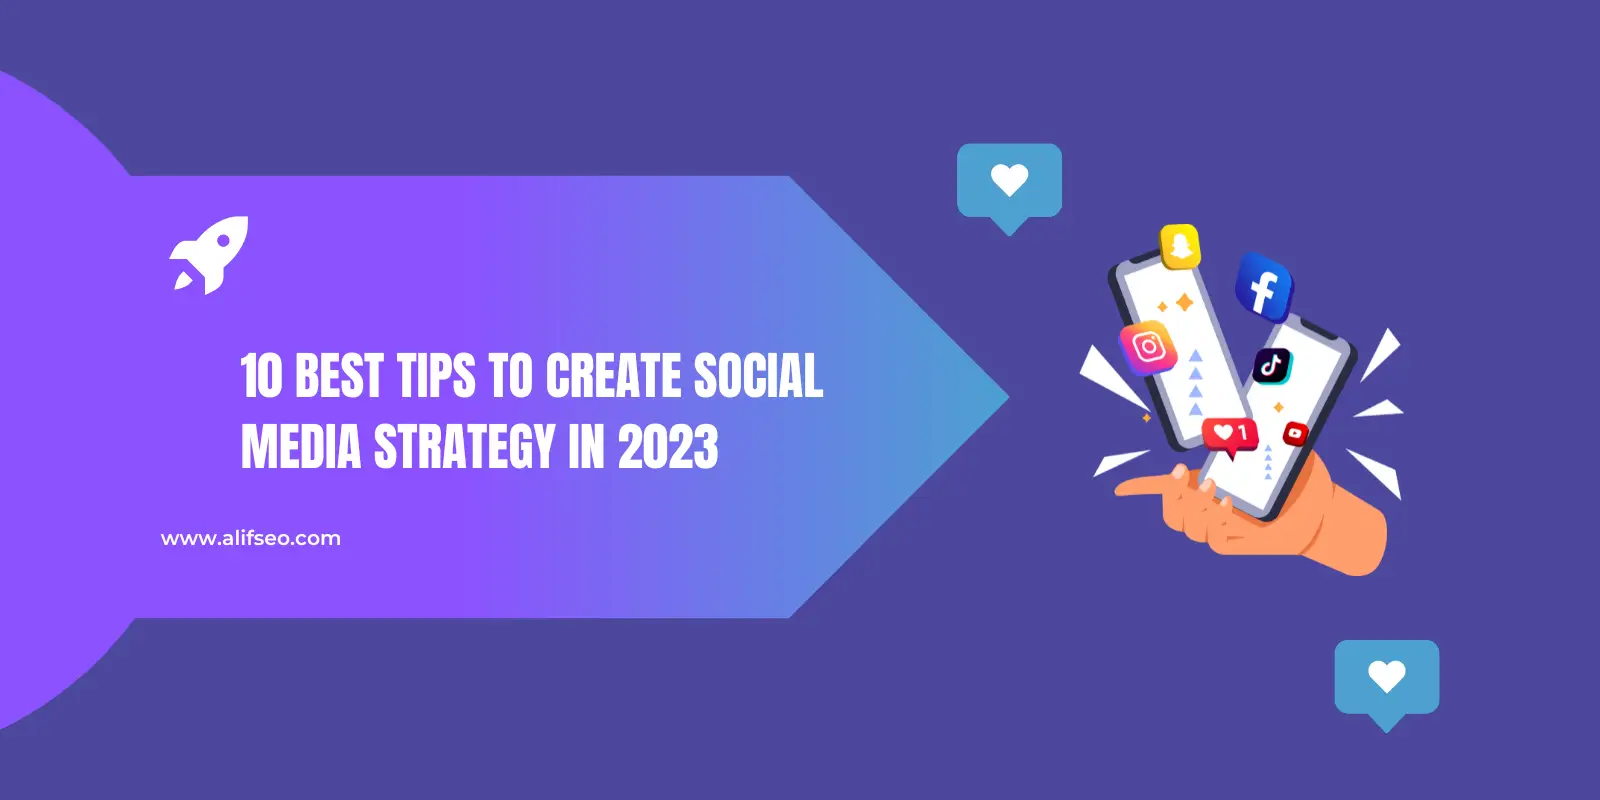 10 Best Tips to Create Social Media Strategy in 2023